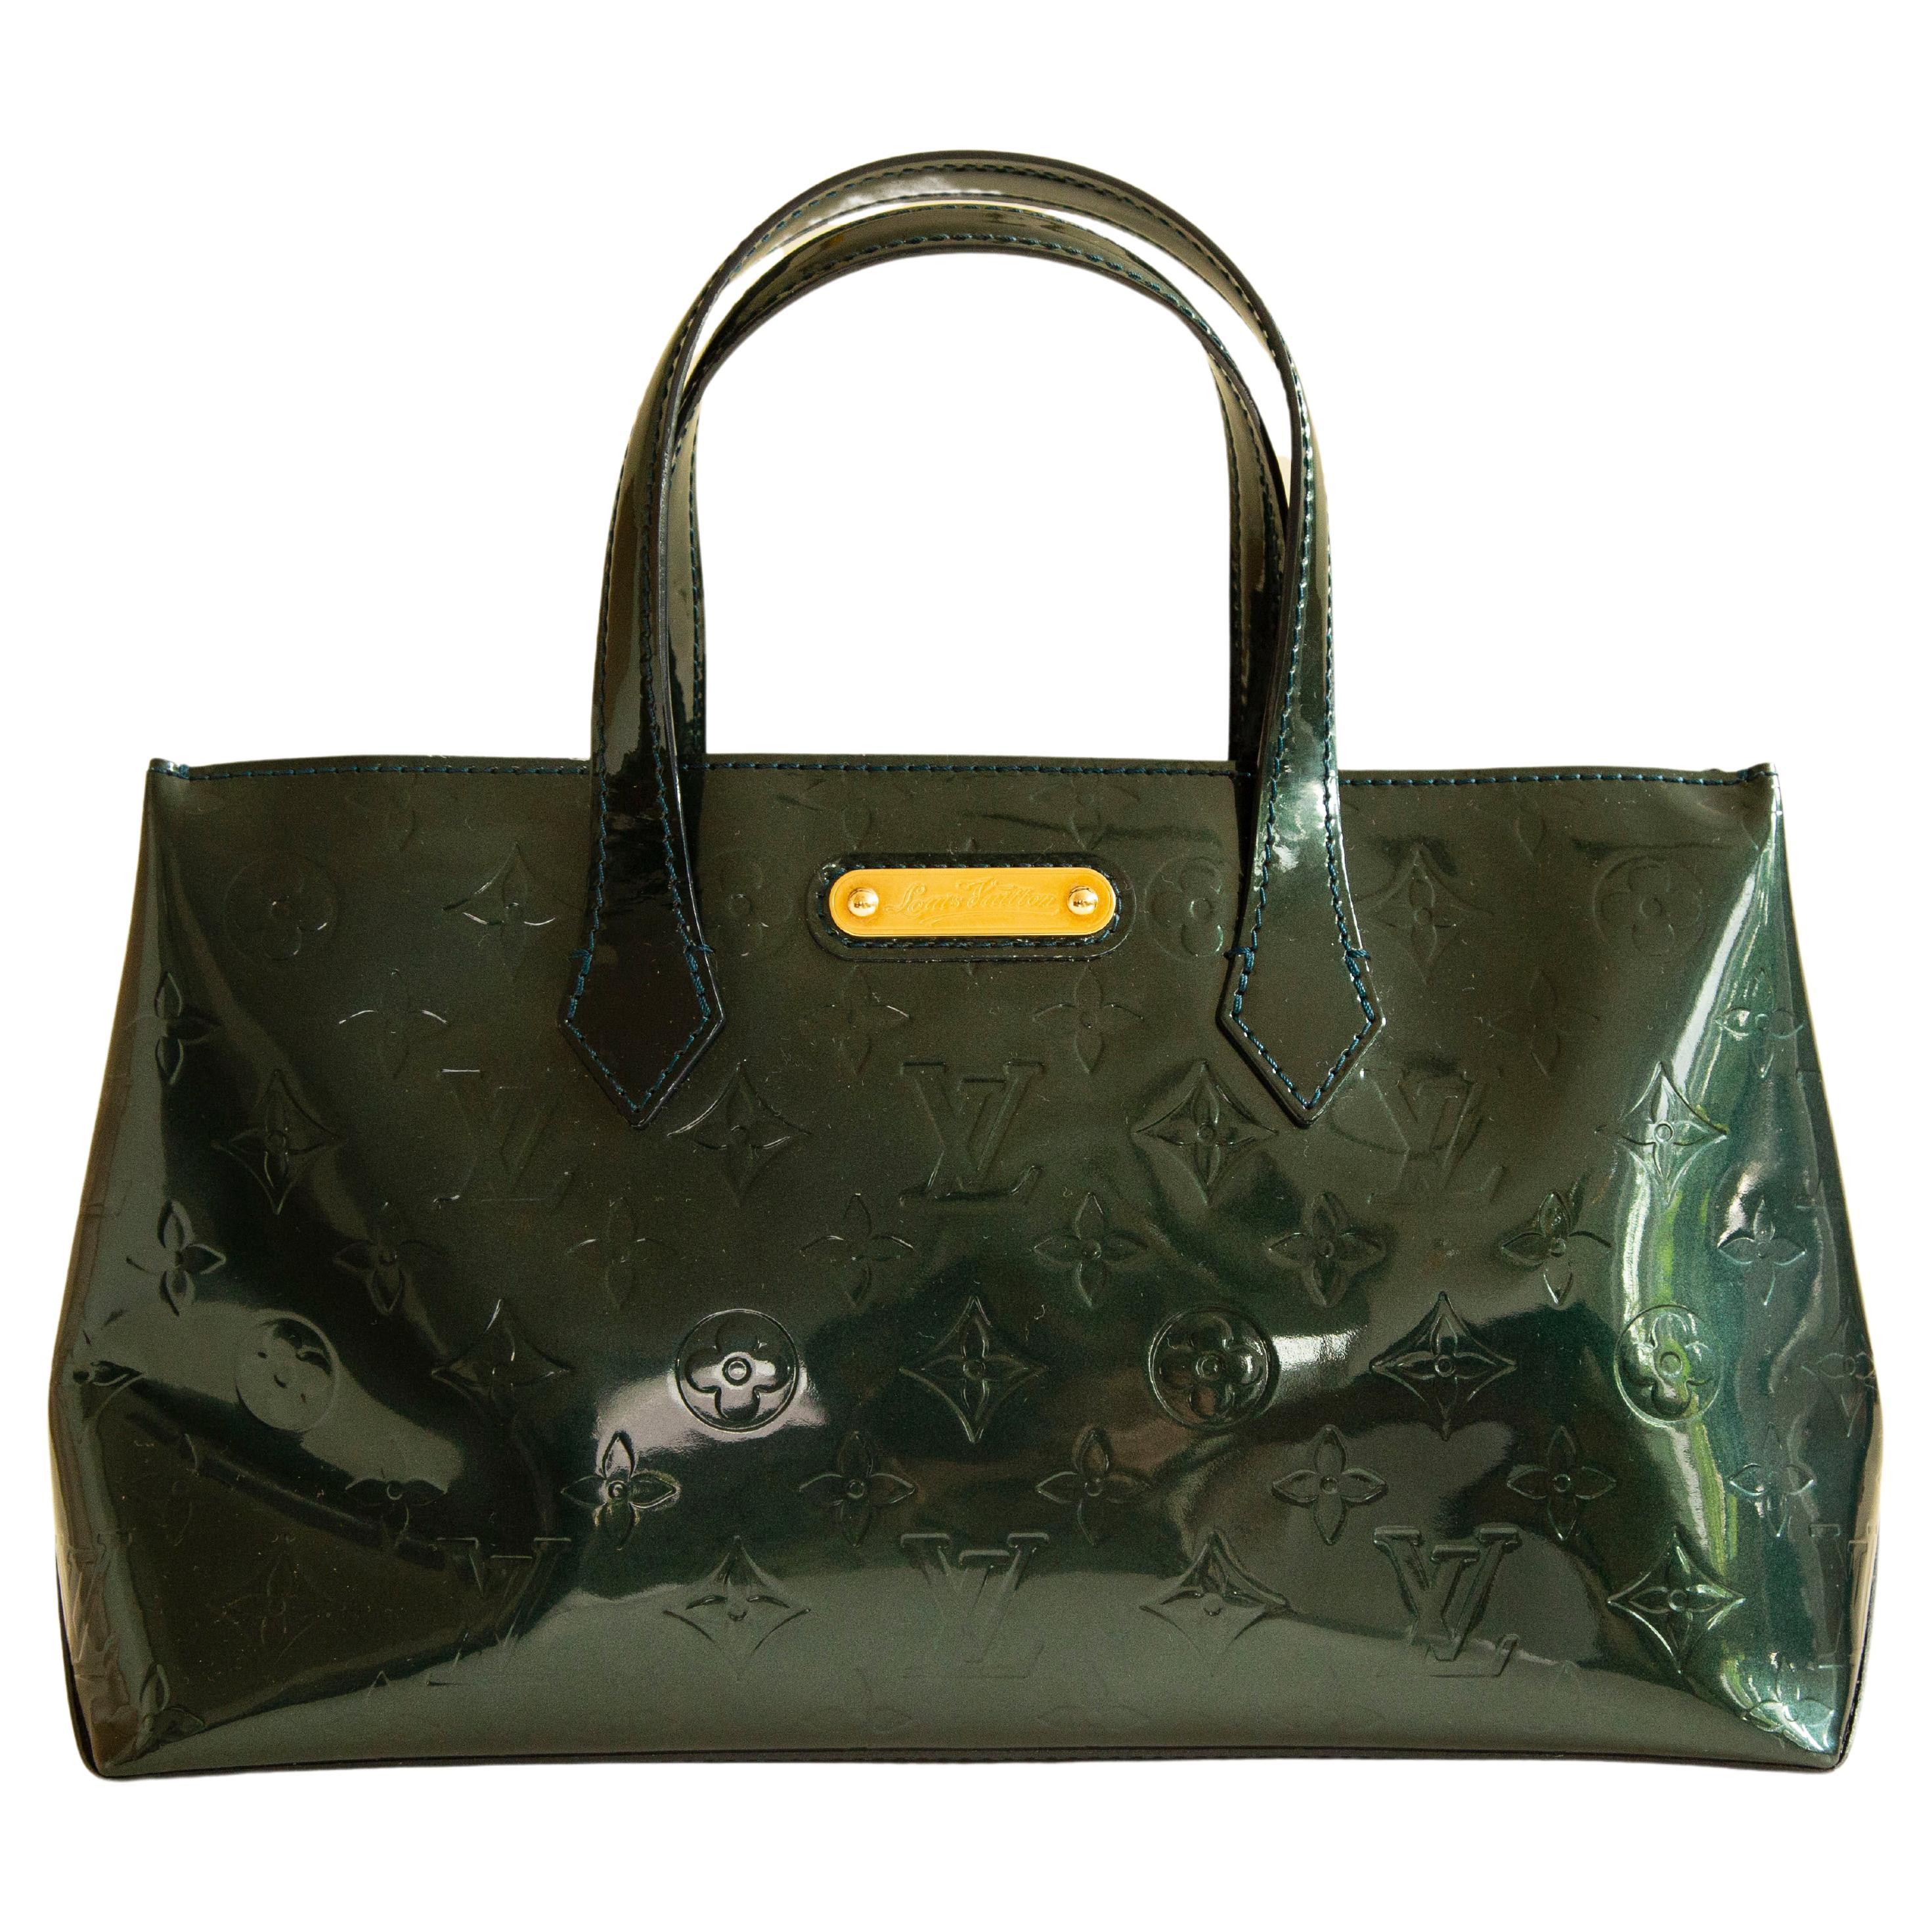 Louis Vuitton Jelly Limited Edition Reef Pm 4lv61 Turquoise Patent Leather  Tote, Louis Vuitton